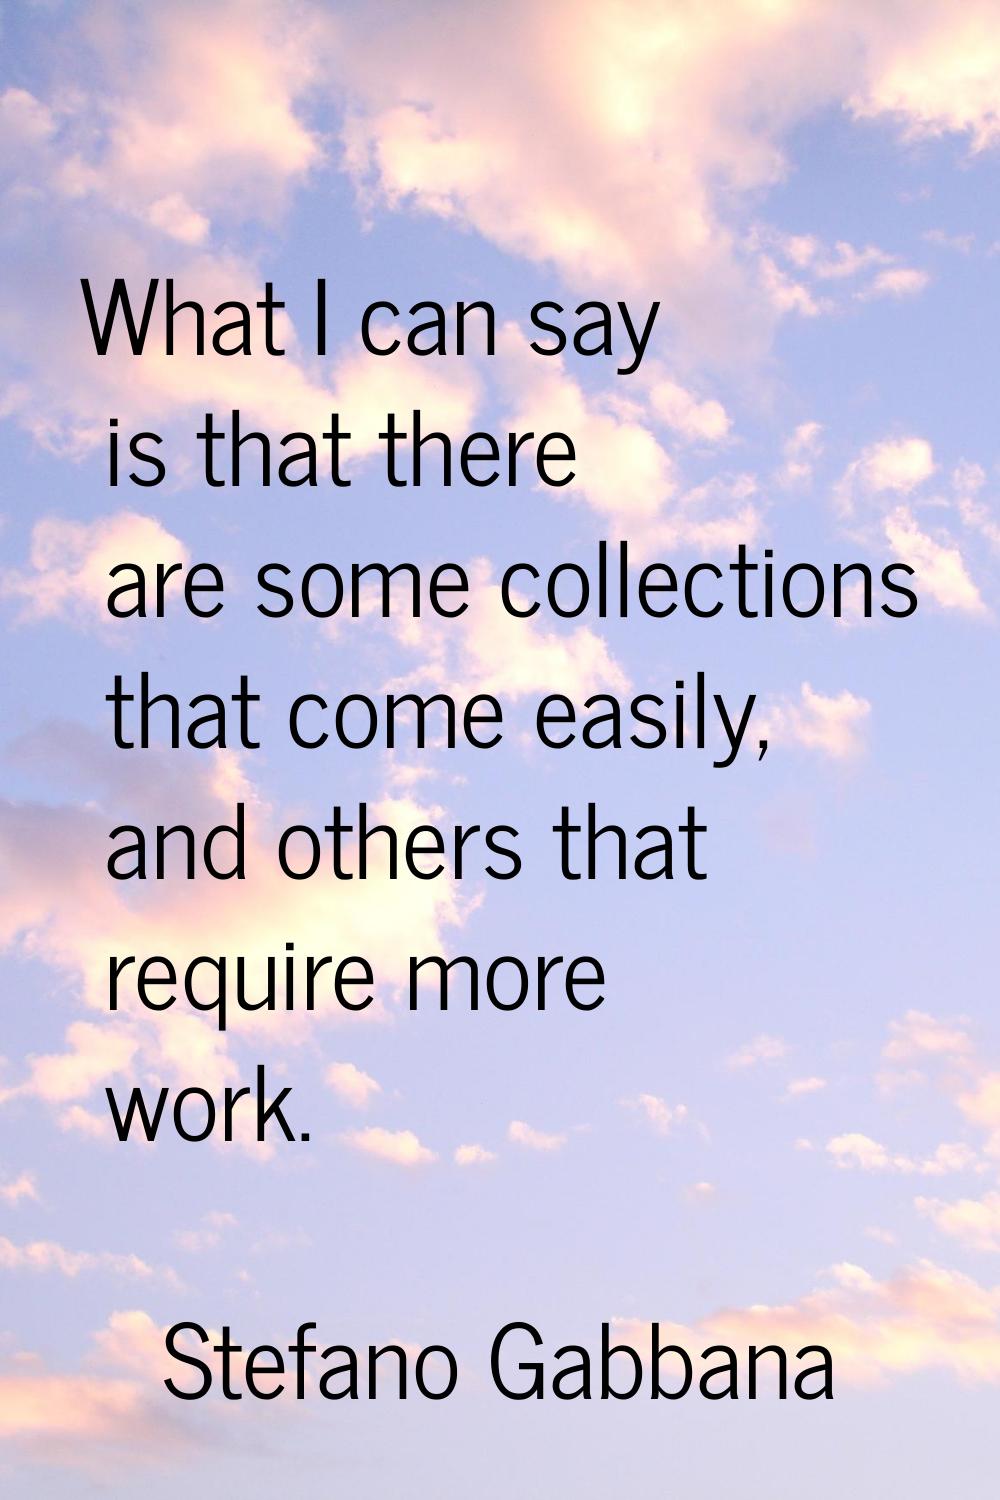 What I can say is that there are some collections that come easily, and others that require more wo